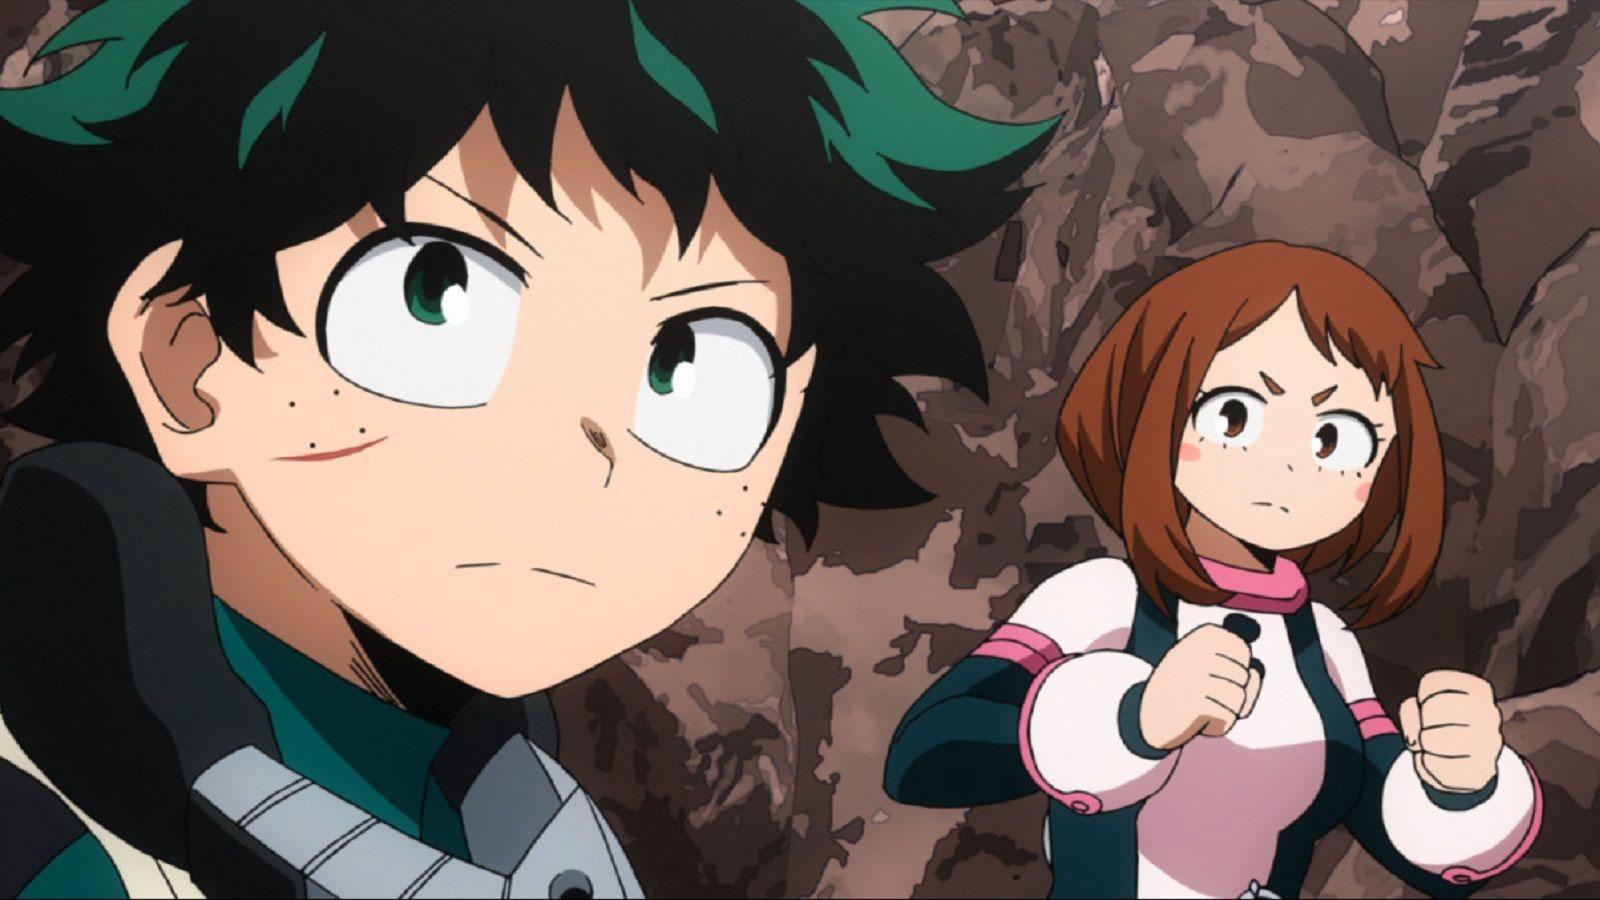 My Hero Academia Season 5 confirmed, know names of some returning